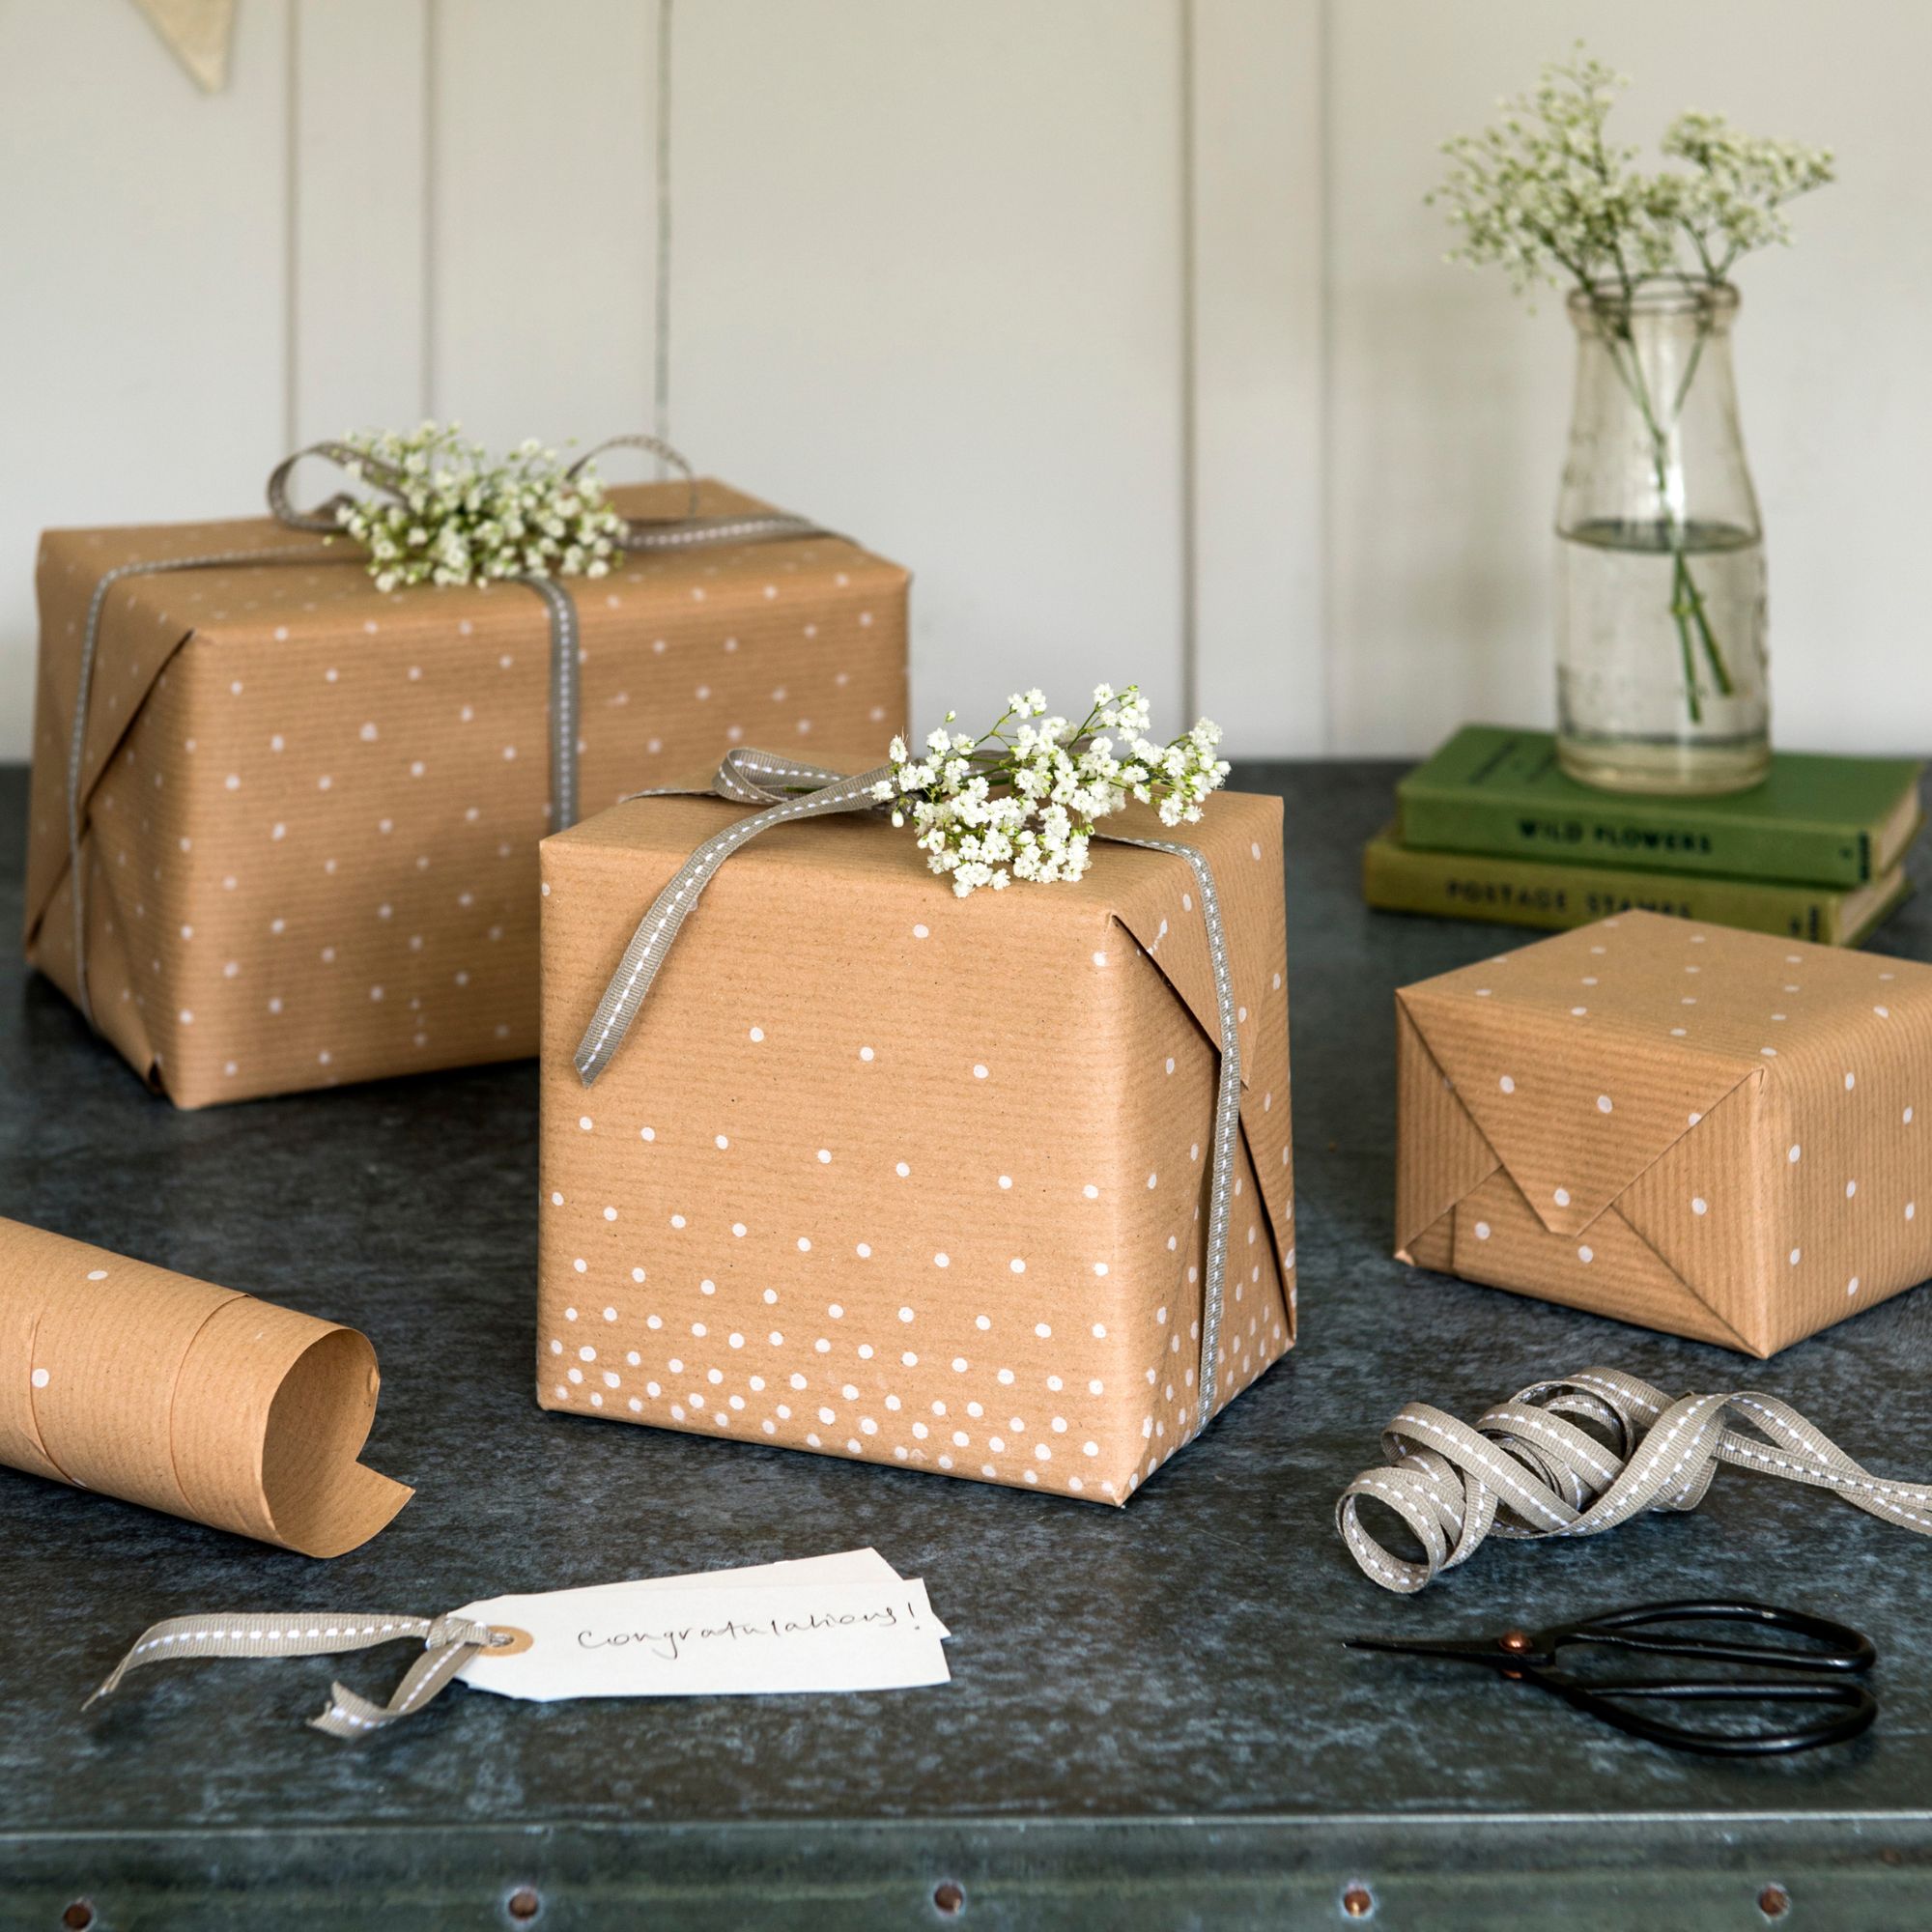 Collection of brown paper wrapped gifts. Polka dot wrapping, real flowers, handmade tags